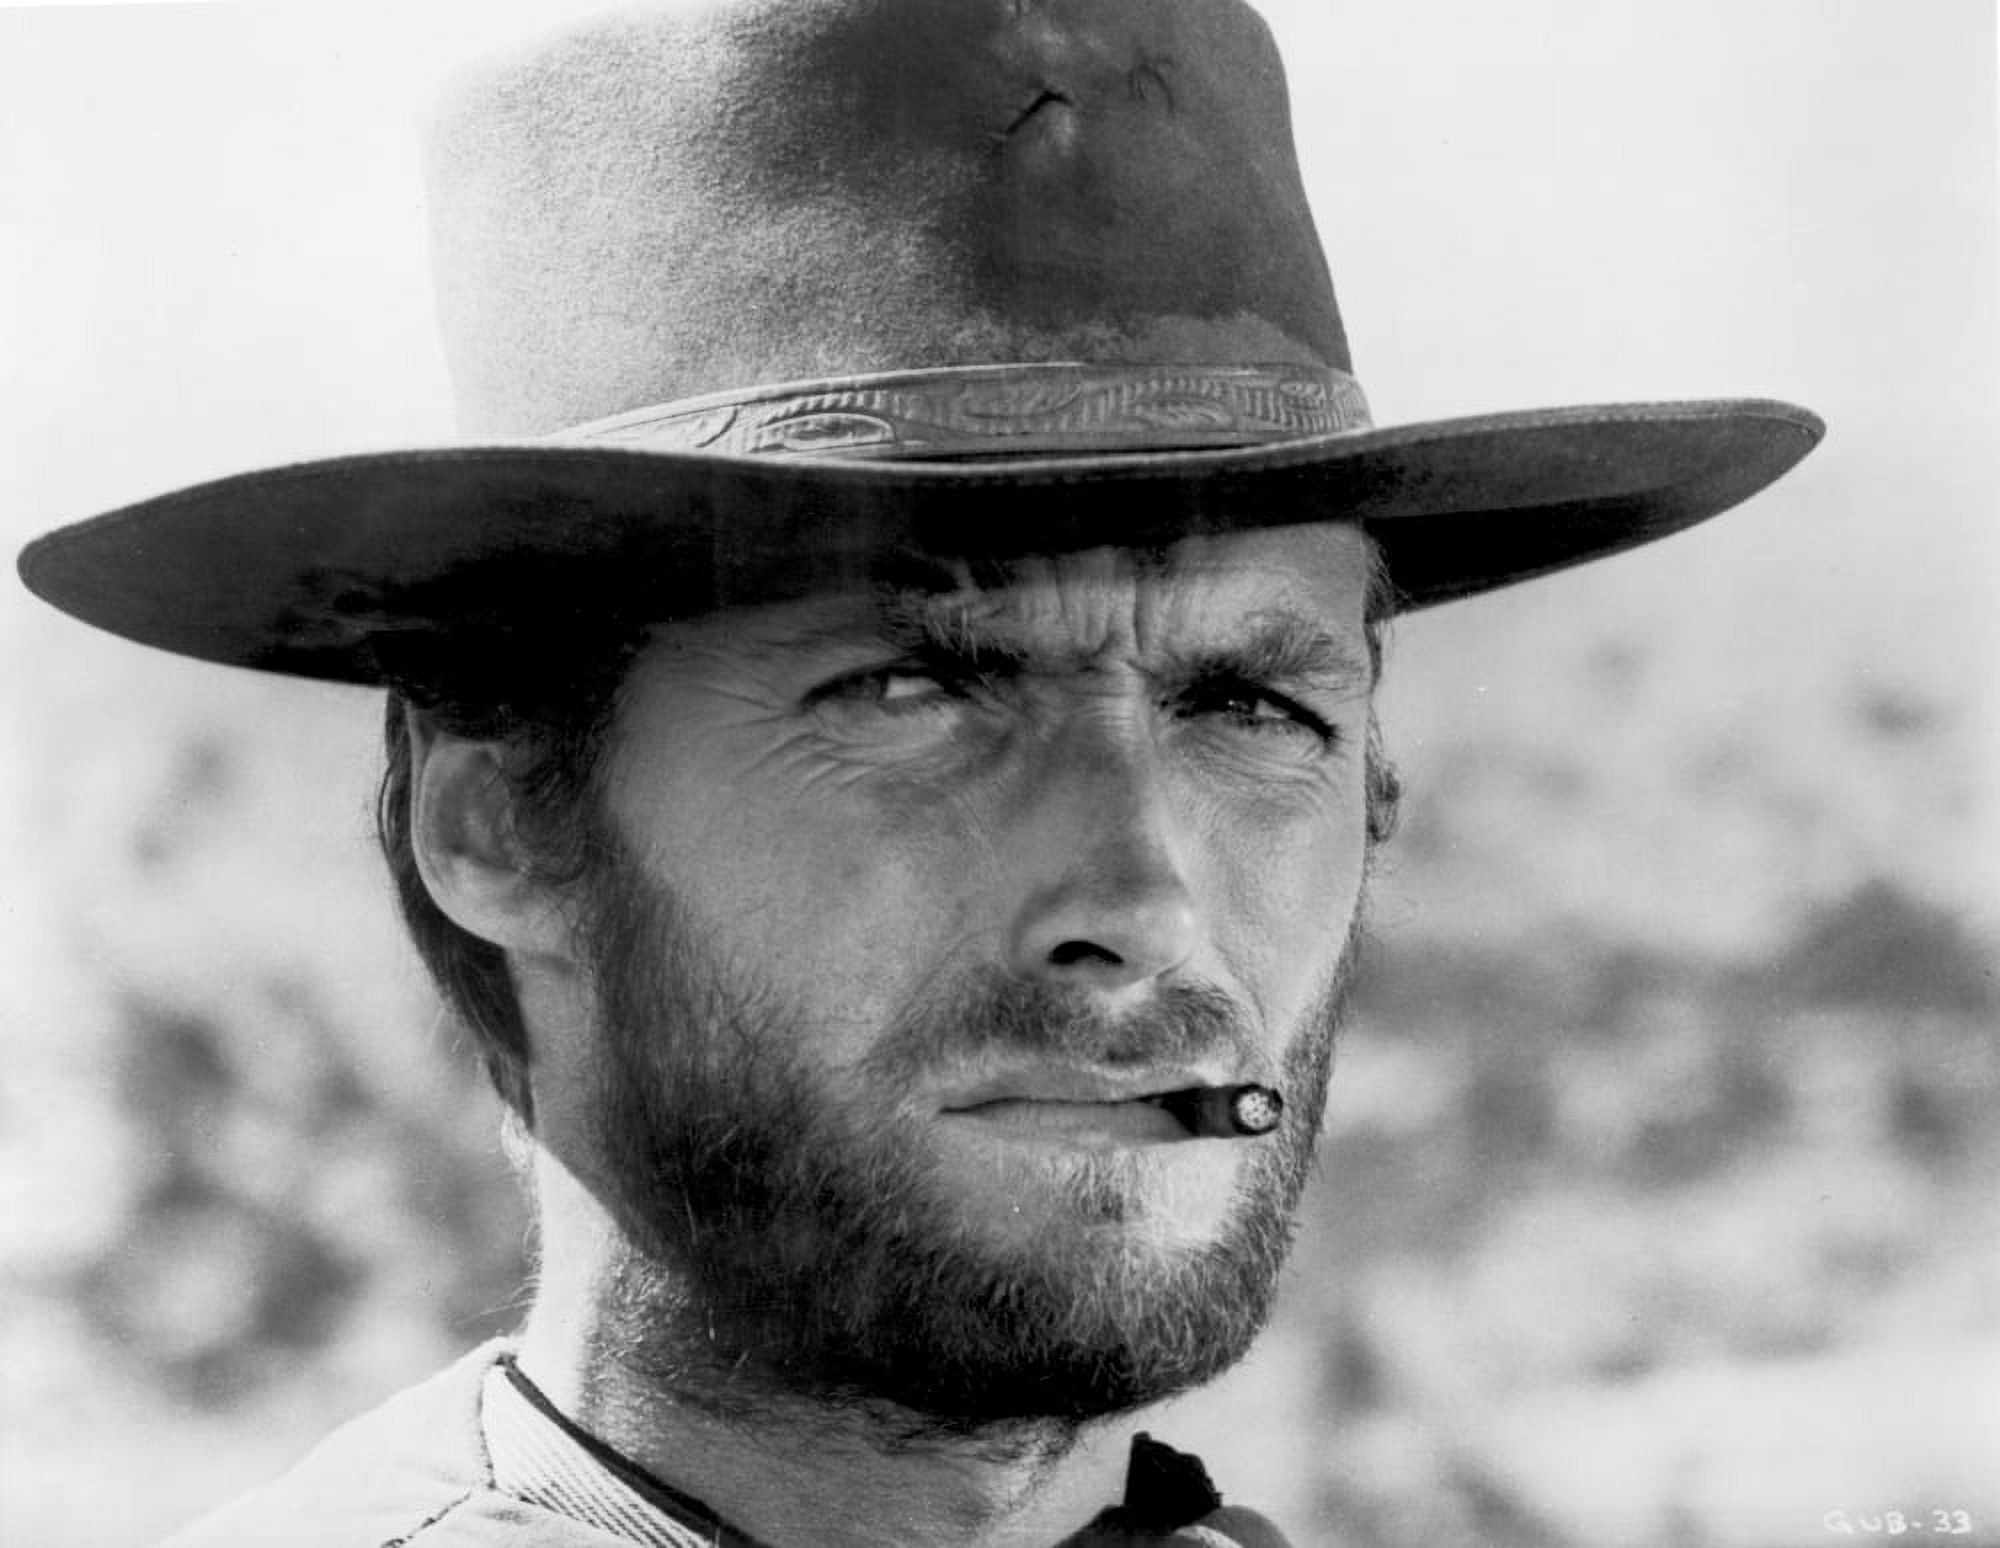 Clint Eastwood Portrait in Classic with Cigarette in His Mouth Photo ...